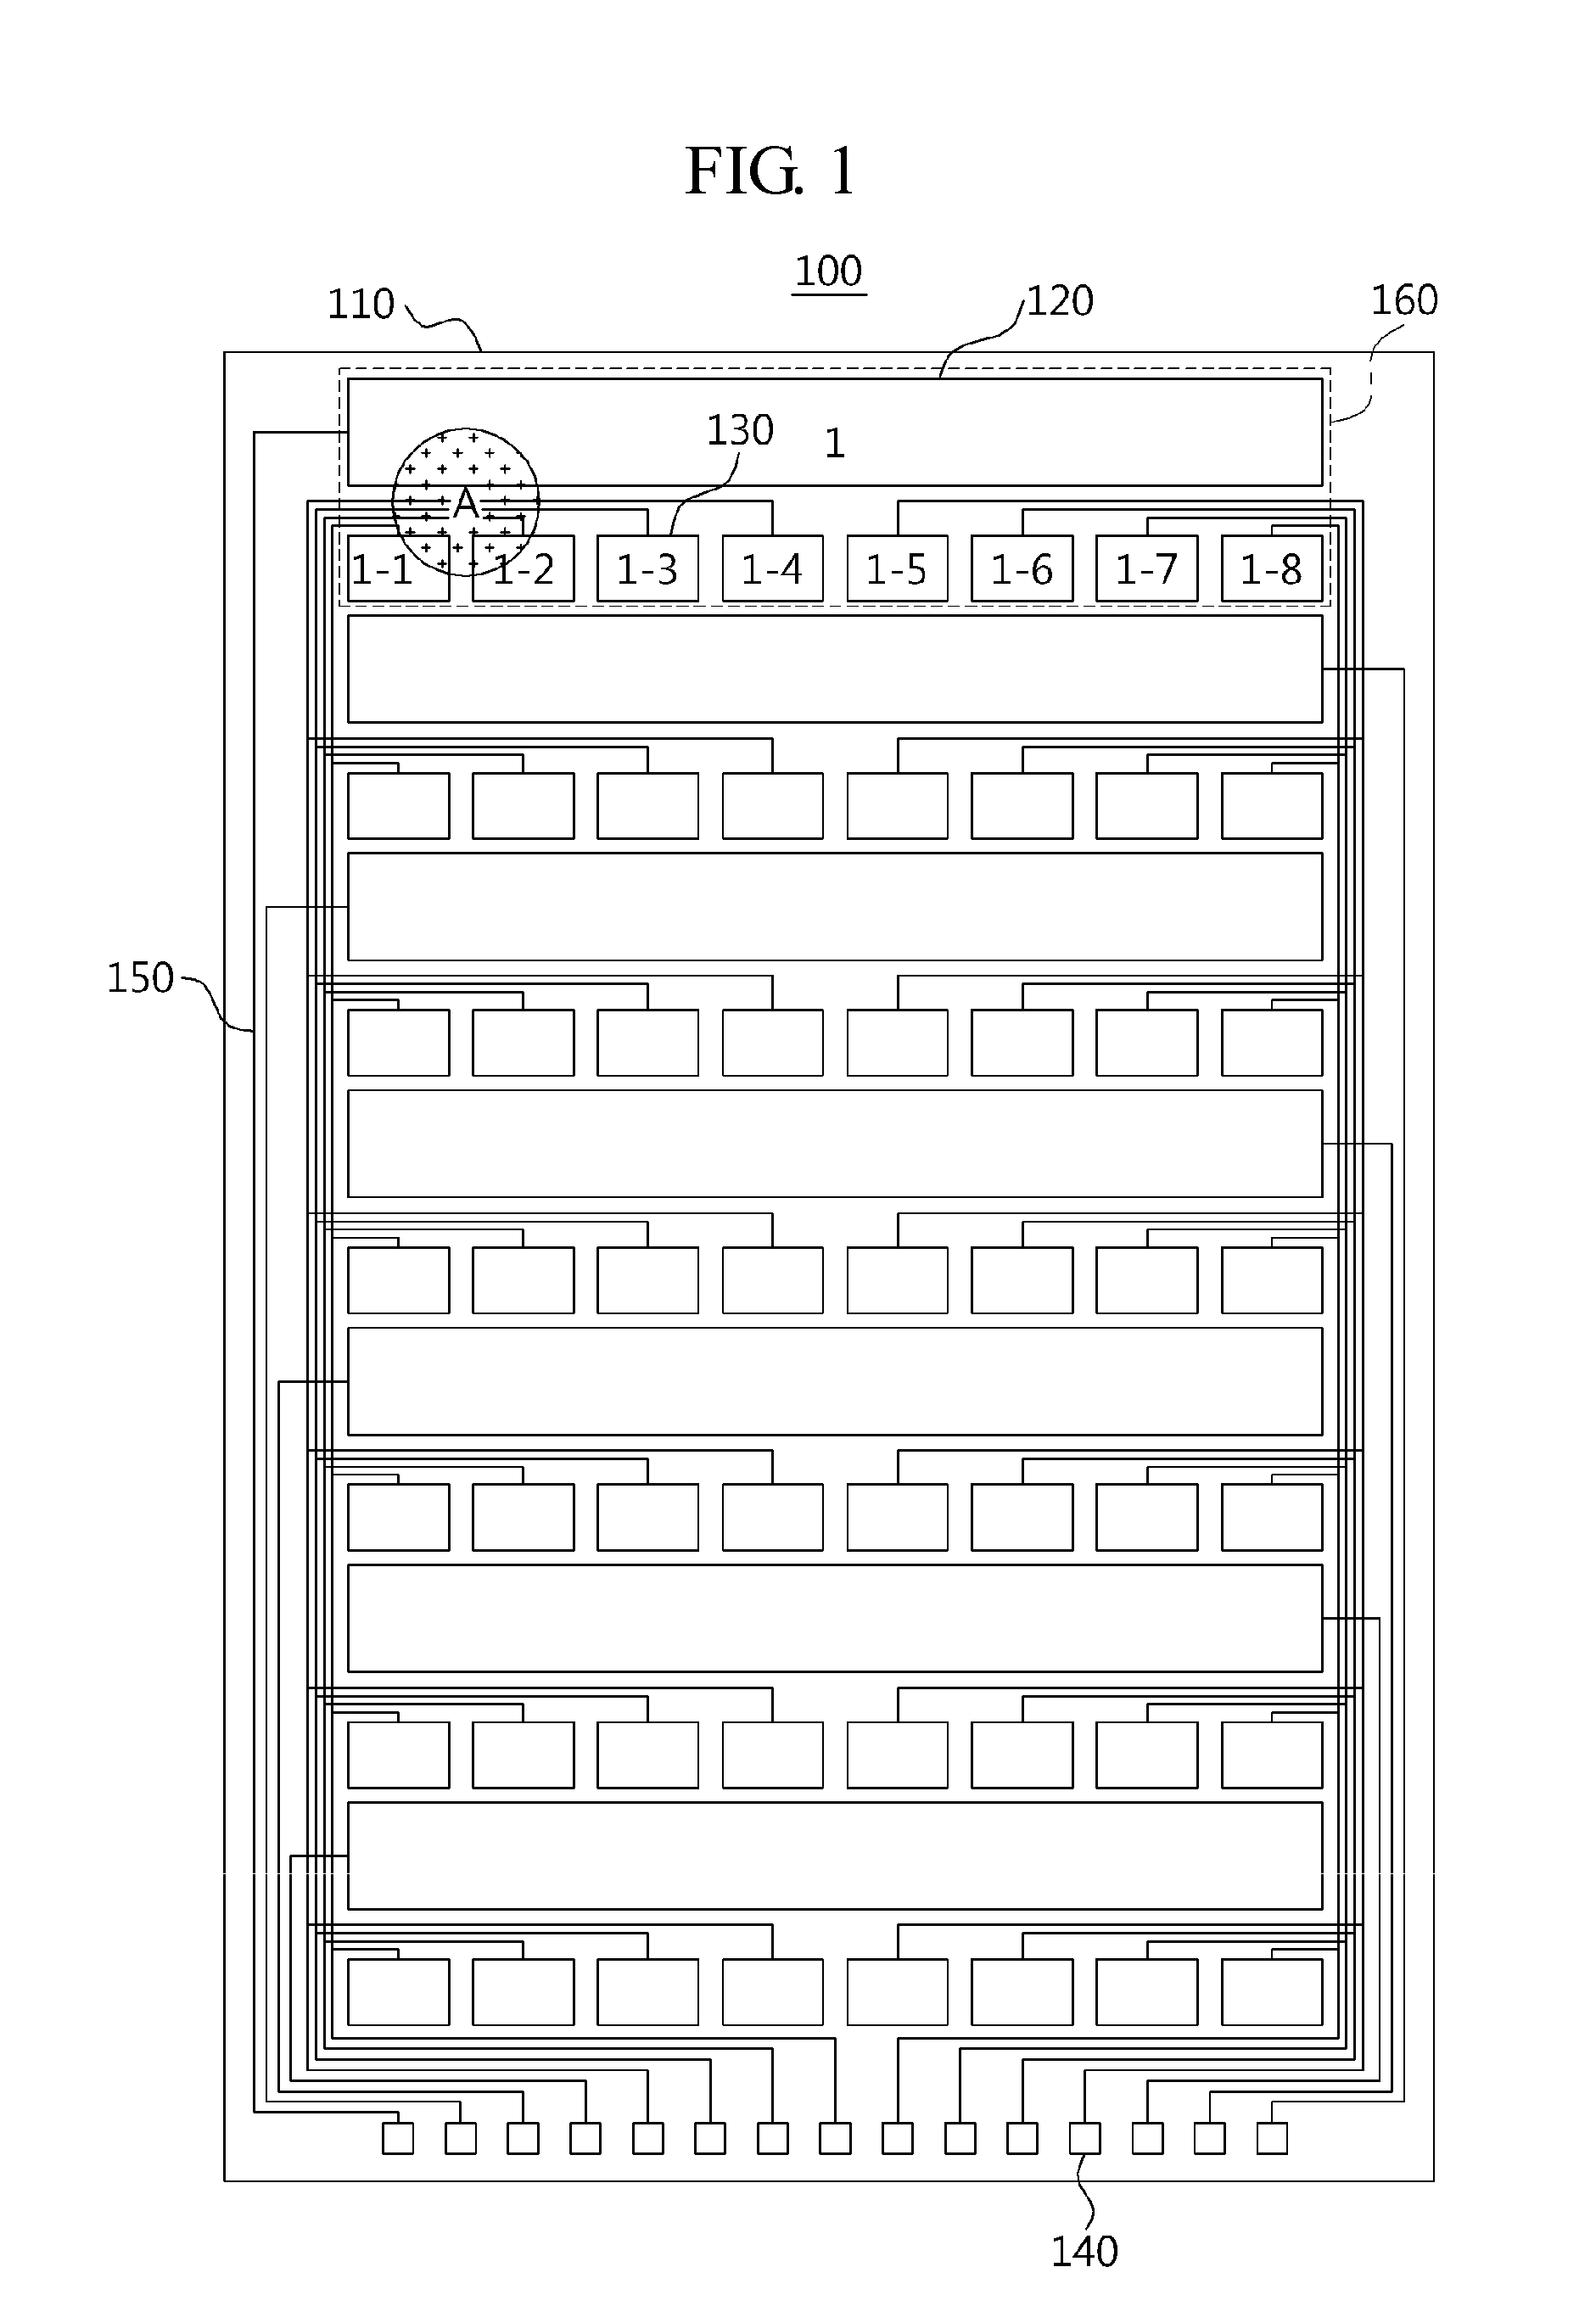 Apparatus and Method for Detecting Contact